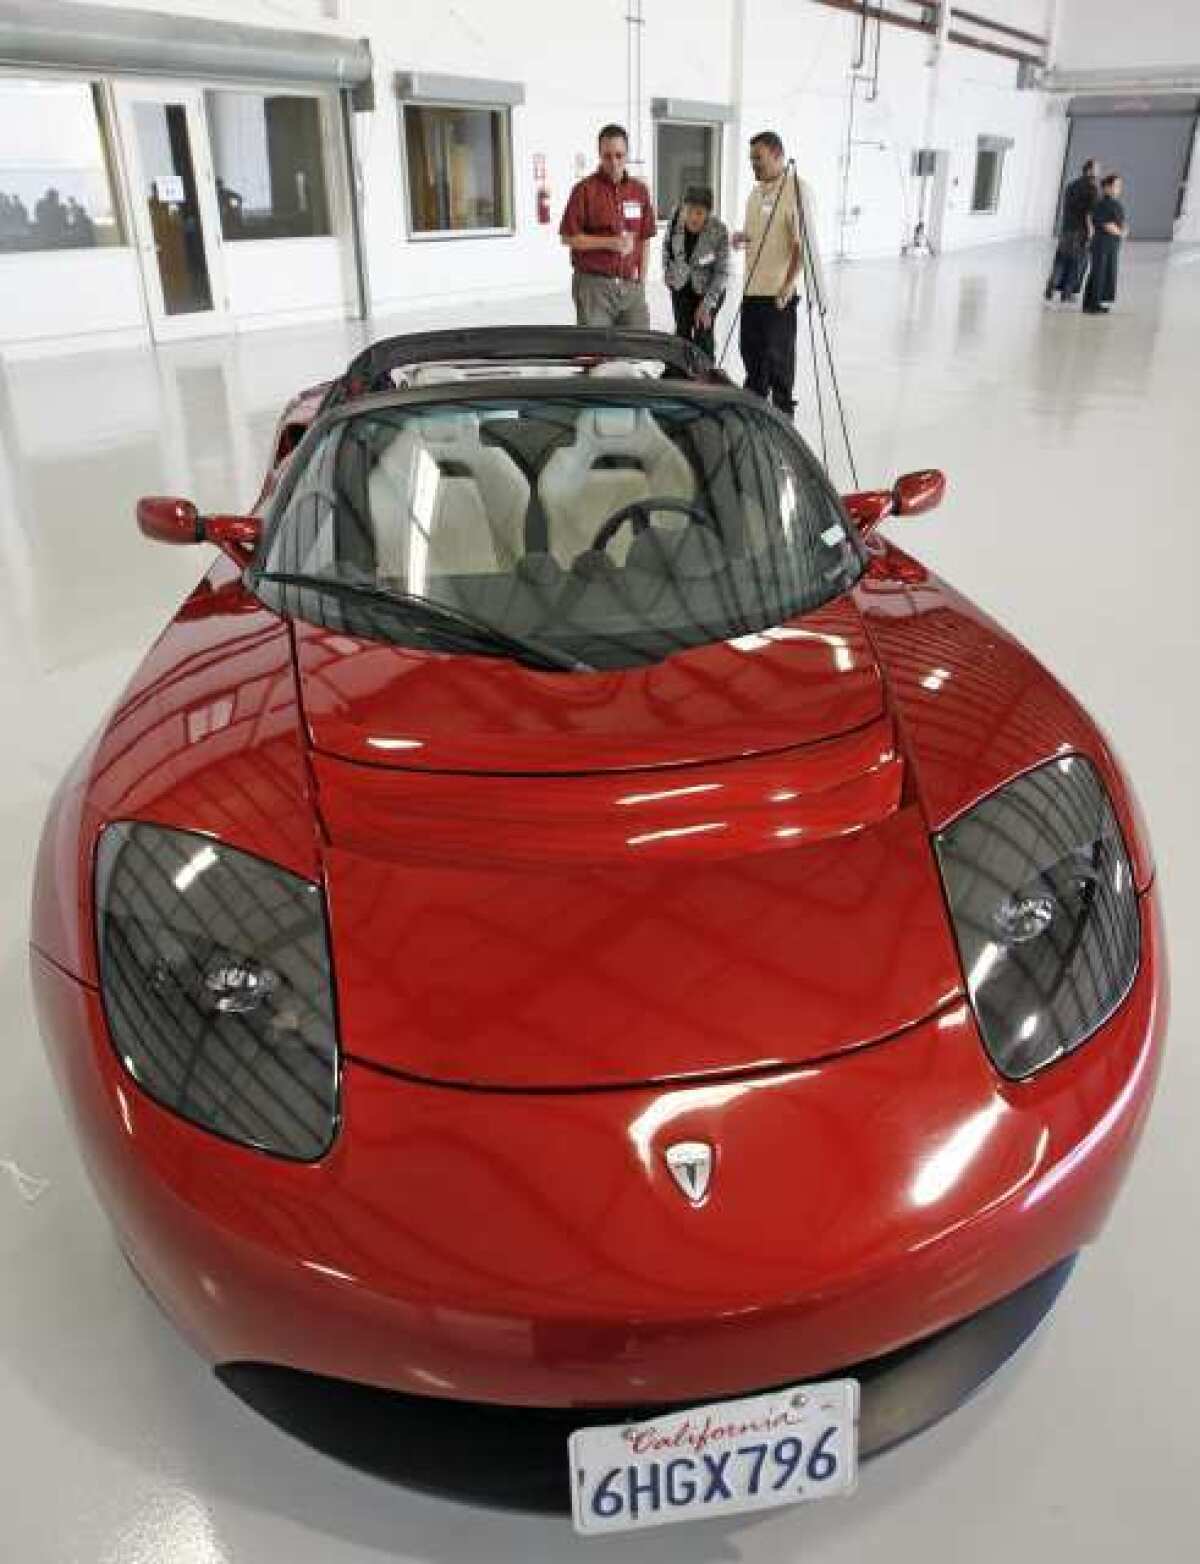 Attendees of a Electric Vehicle Event and Ride & Drive at the Bob Hope Airport take a closer look at a Tesla Roadster.